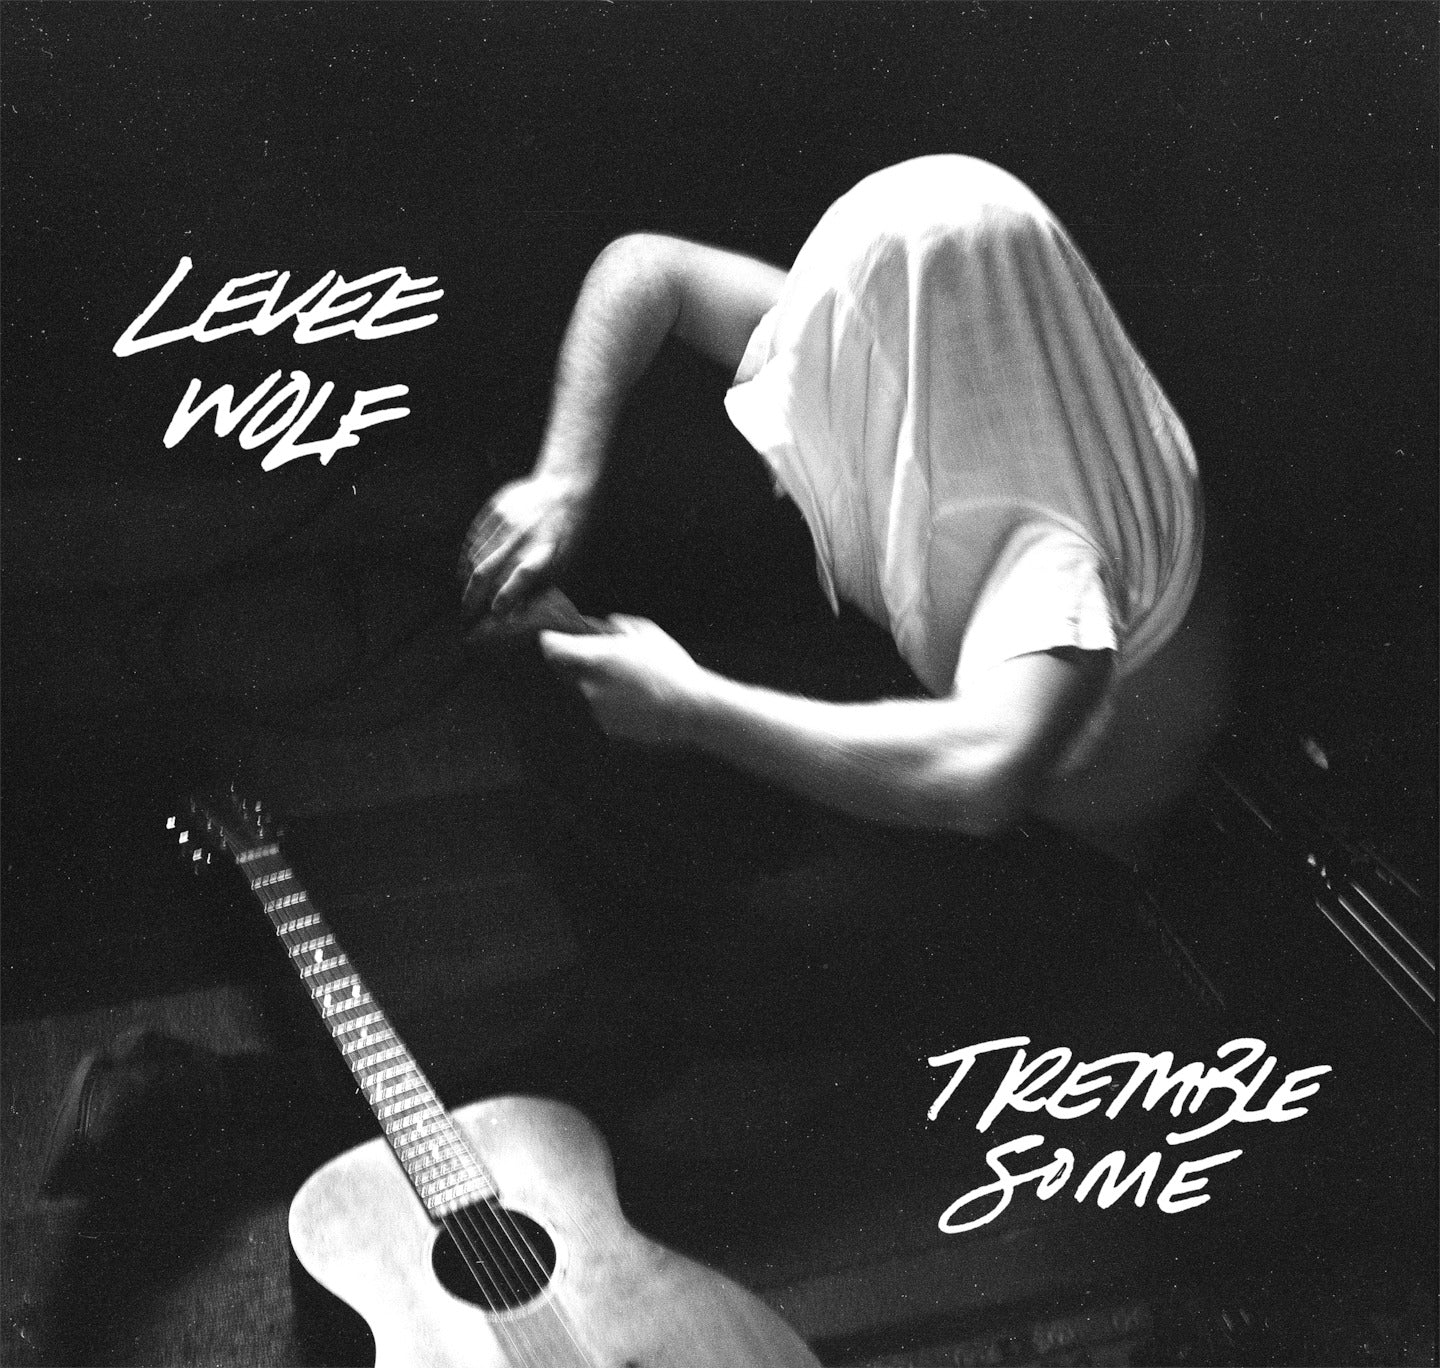 Levee Wolf "Tremble Some"  Download